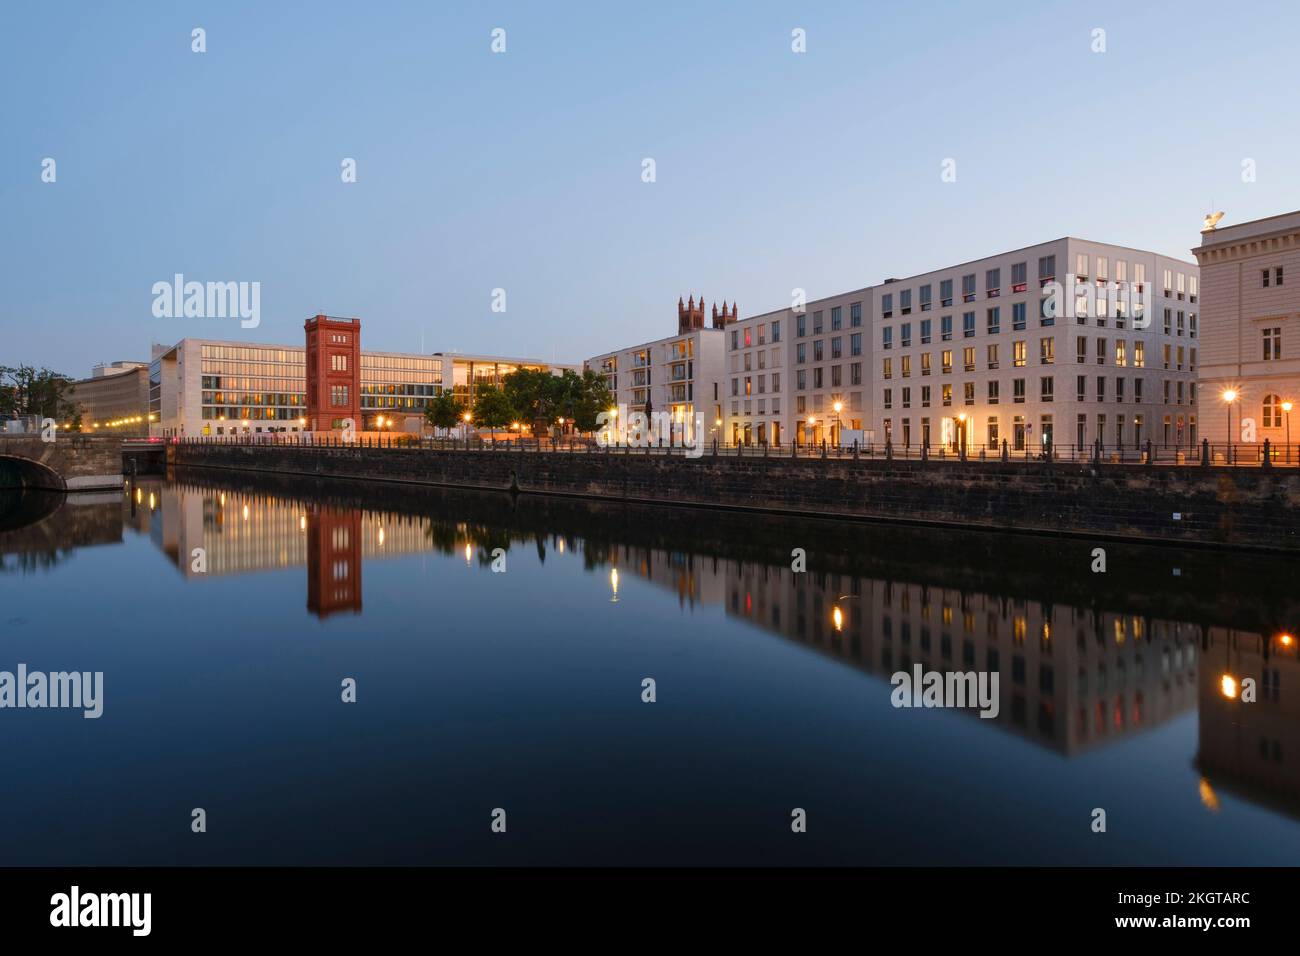 Germany, Berlin, Spree river flowing through Mitte district at dusk Stock Photo